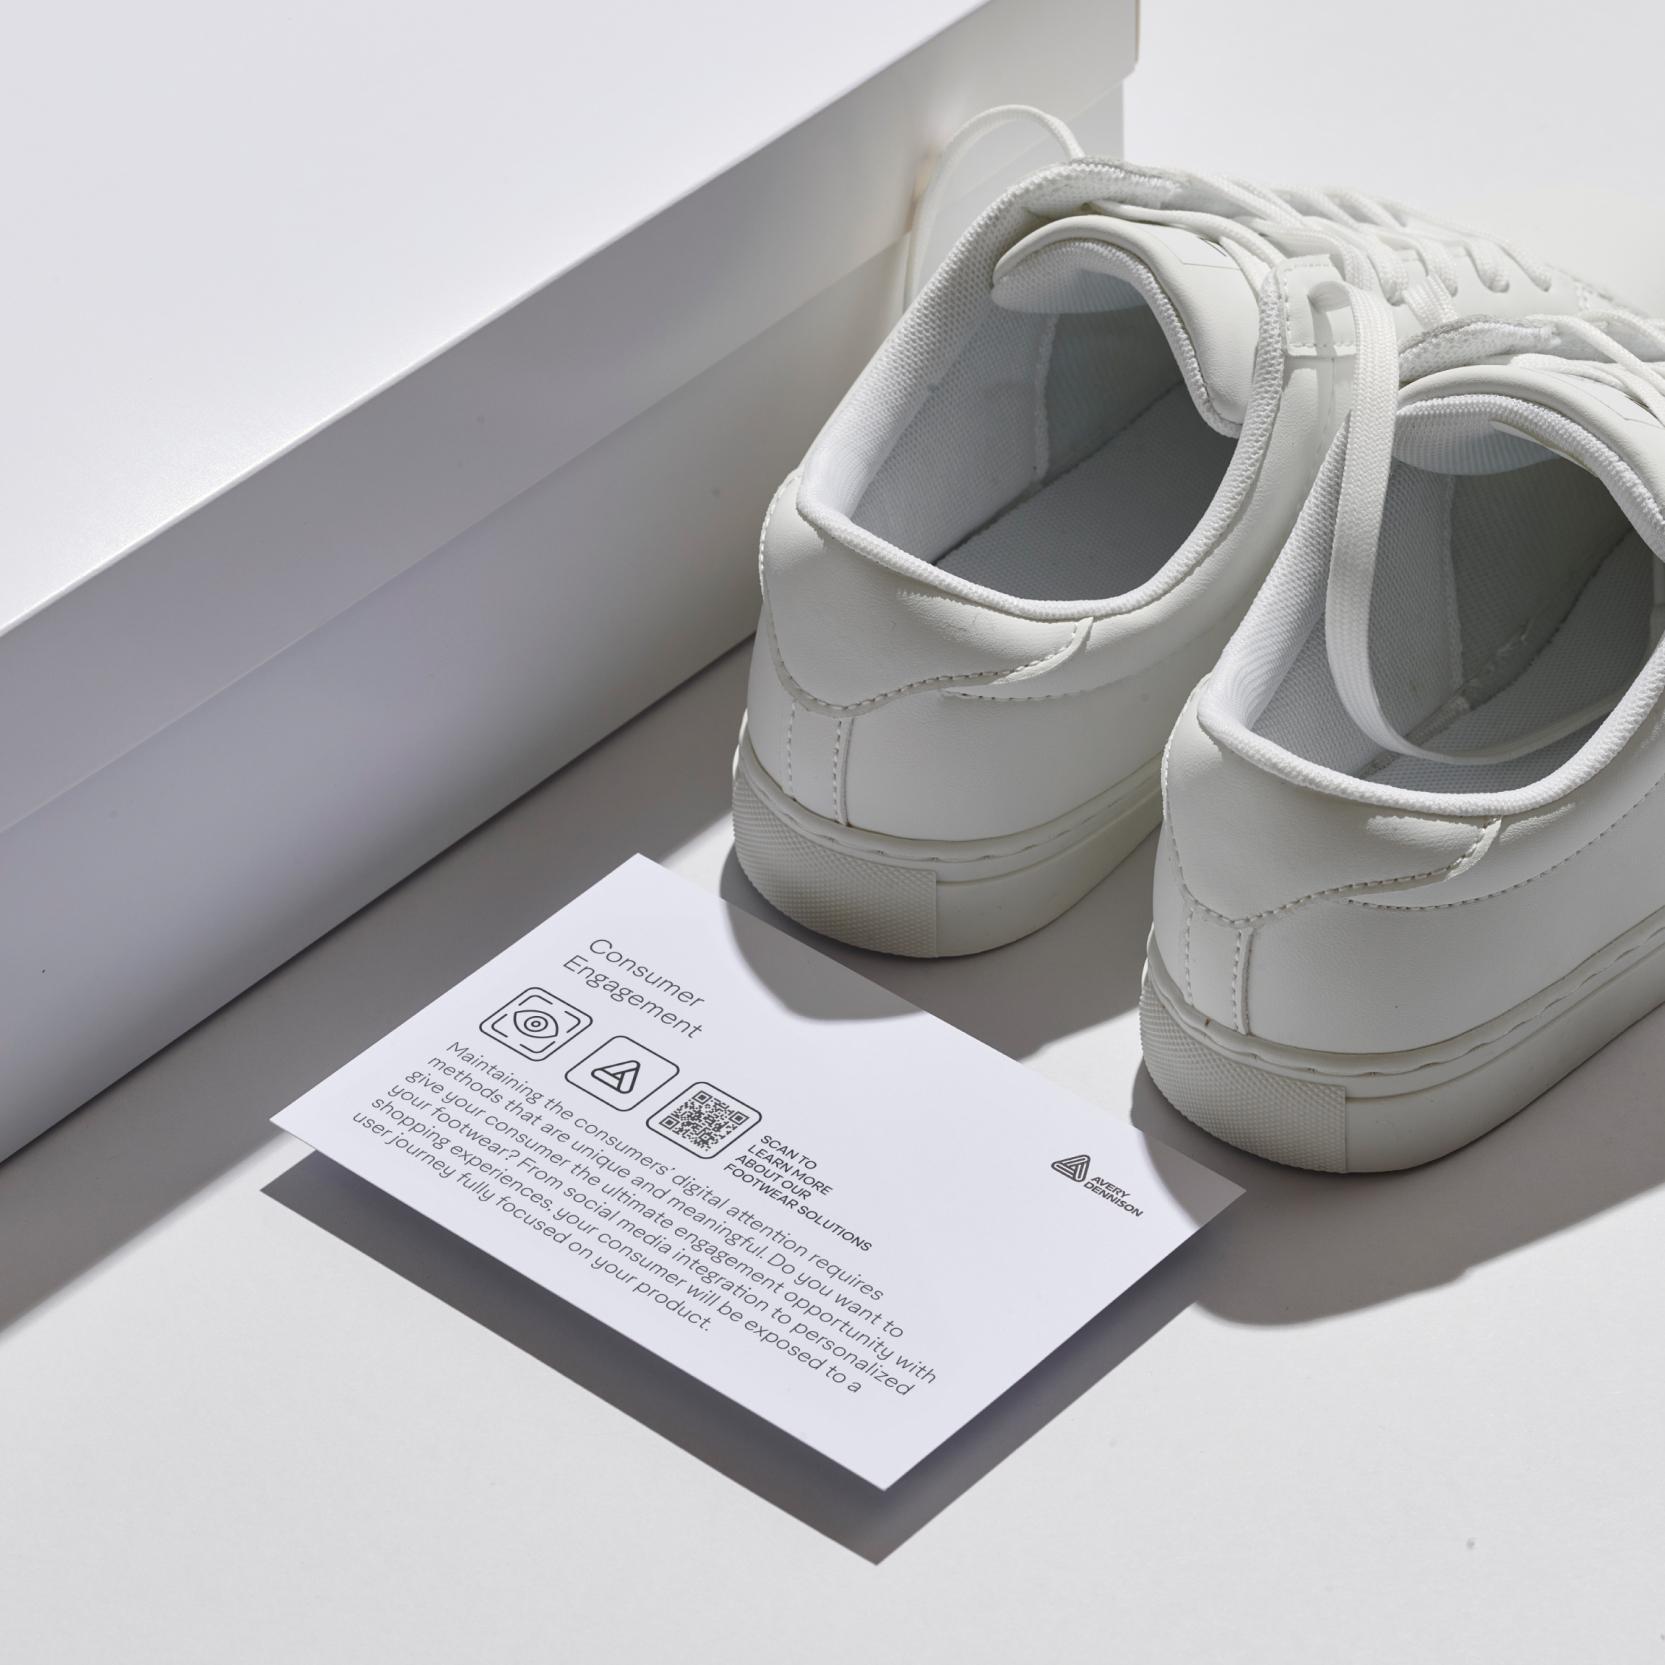 sneakers outside of shoe box with consumer engagement postcard